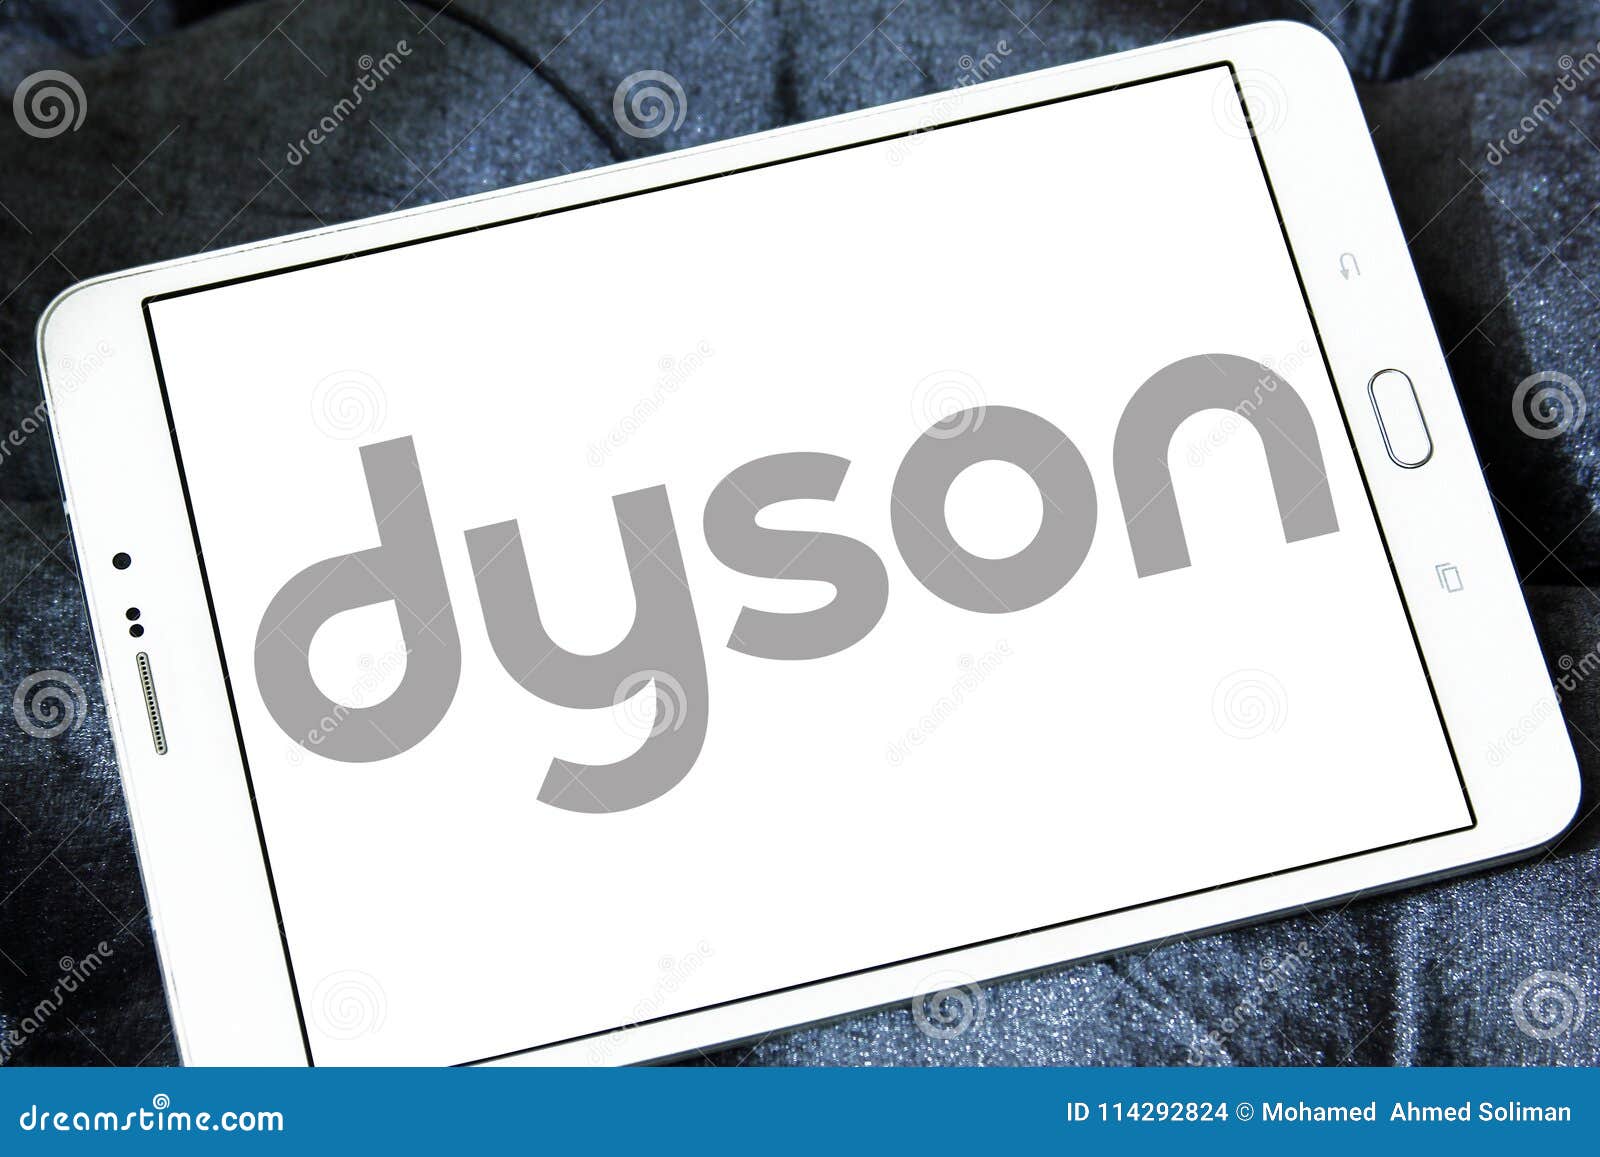 Dyson company editorial stock image. of - 114292824